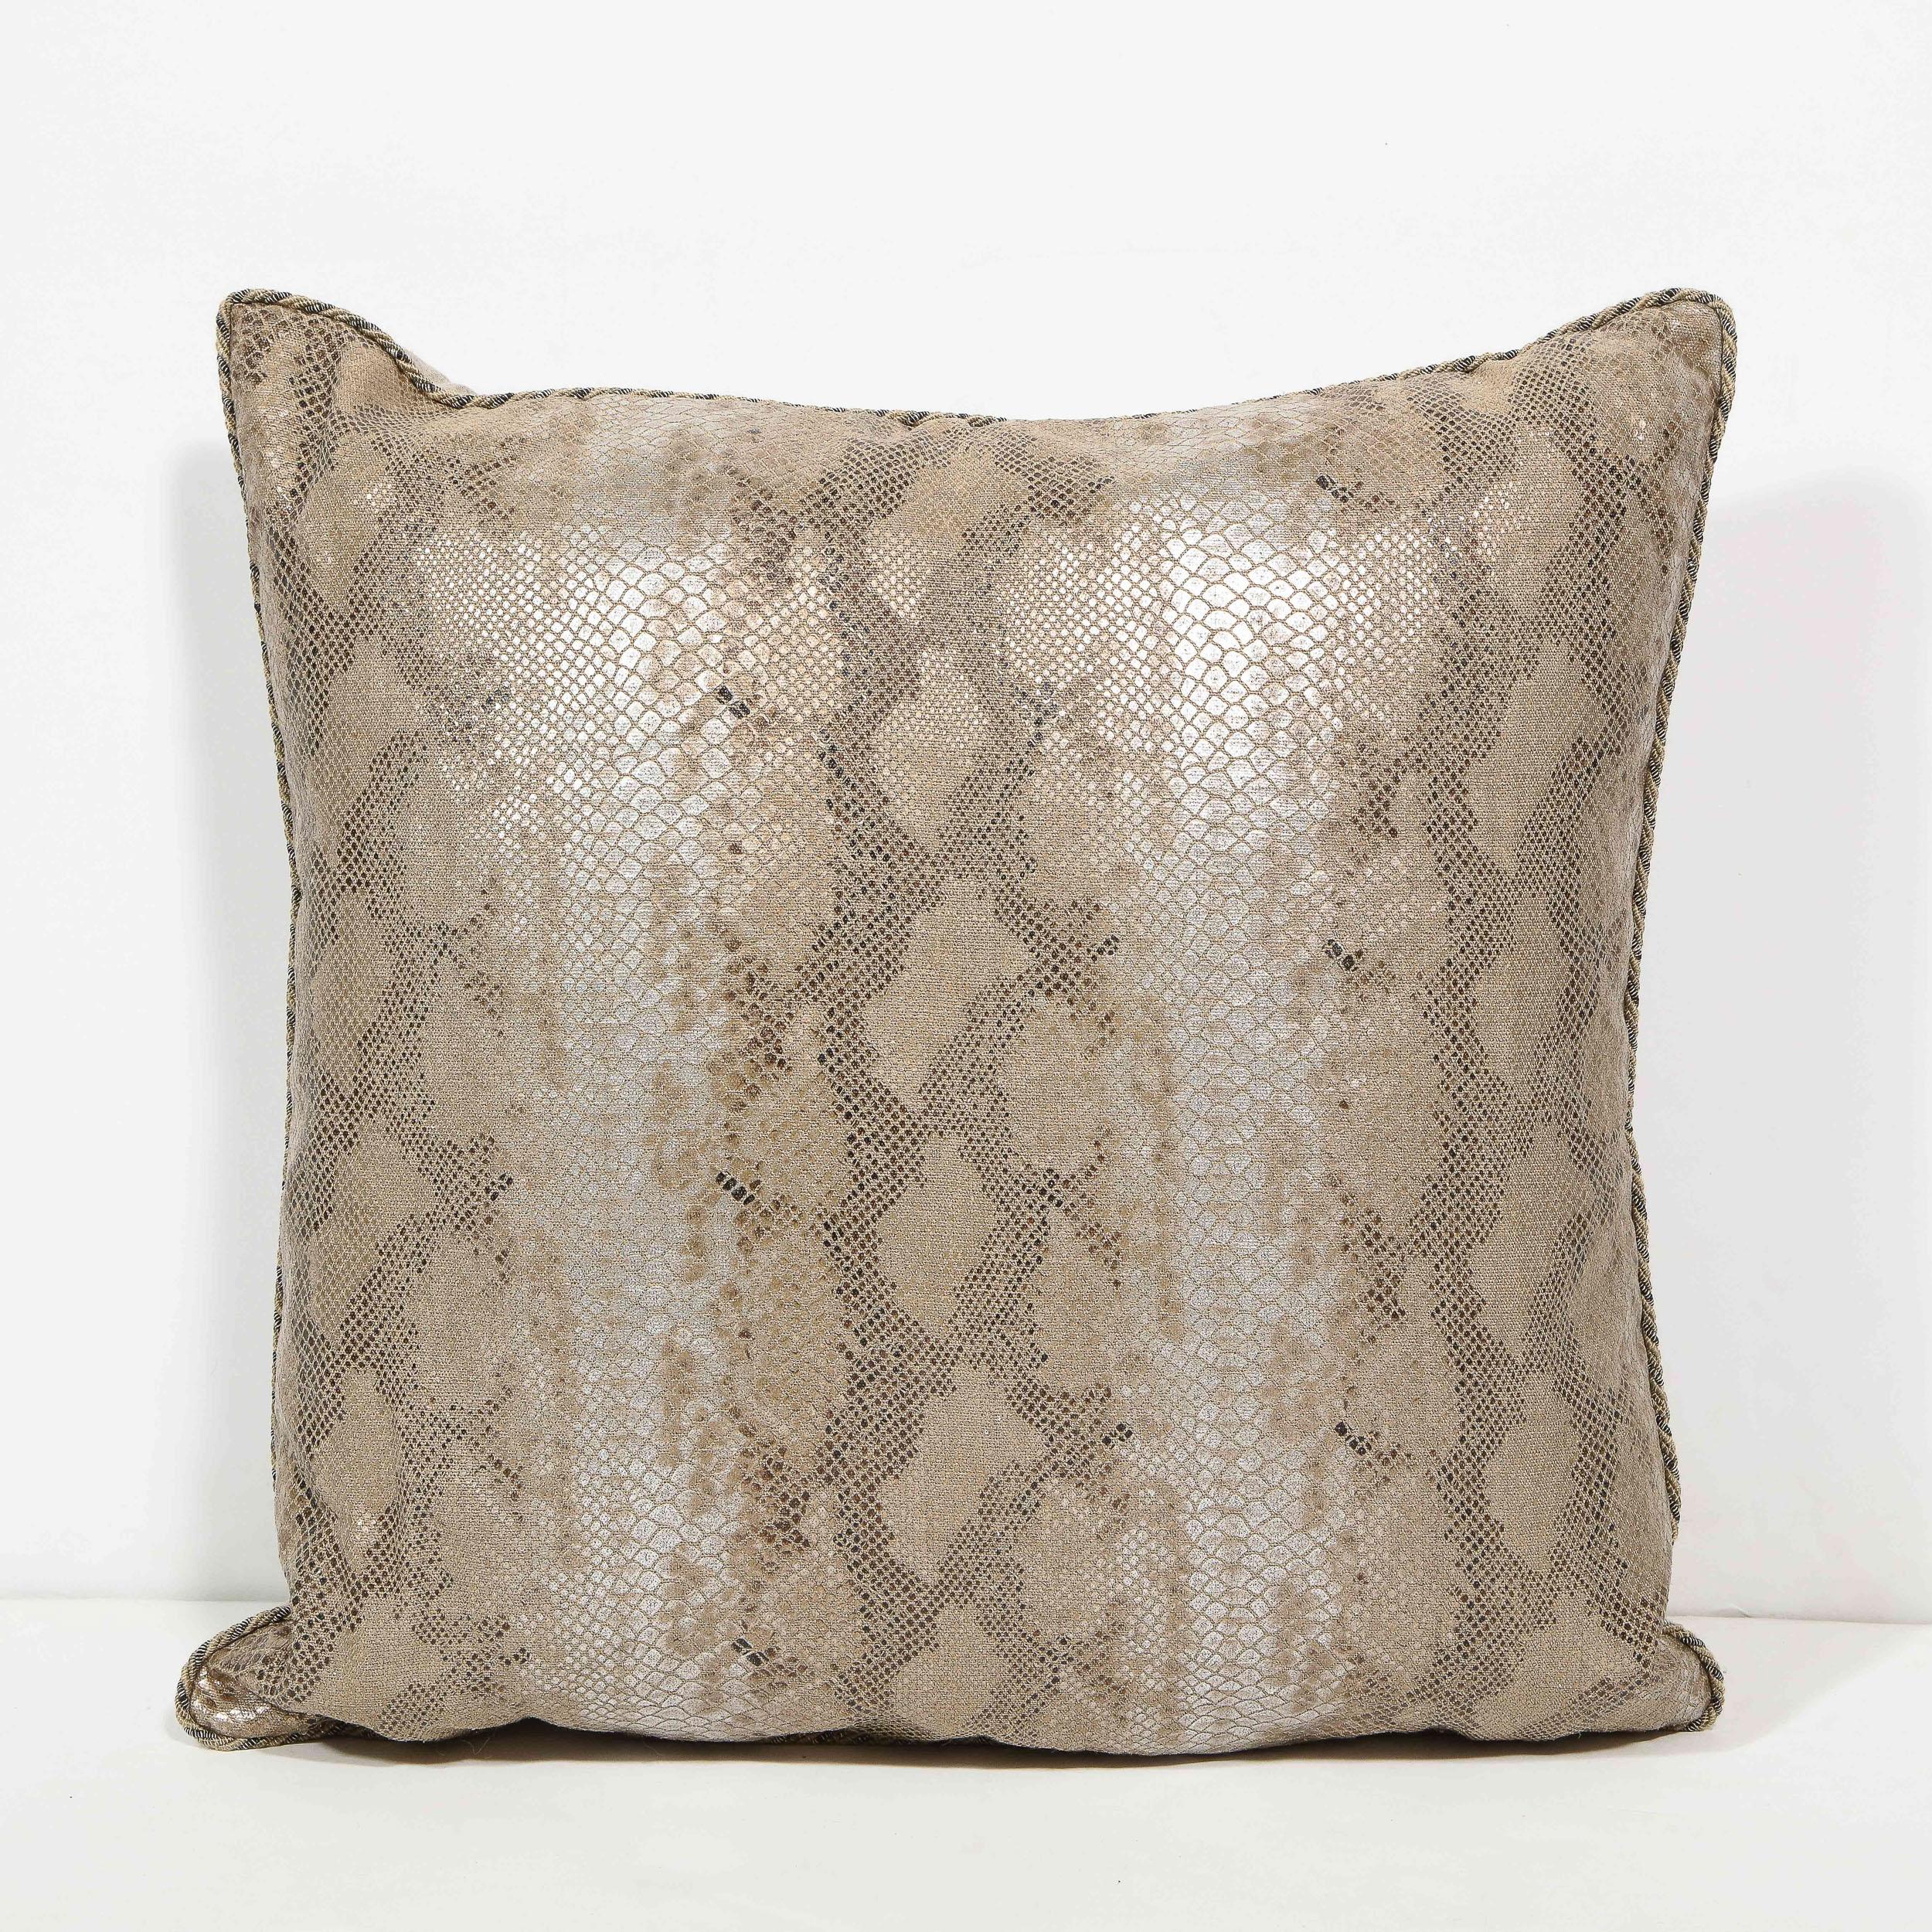 Modernist Iridescent Tan and Metallic Python Pattern Pillow with Helix Piping 3